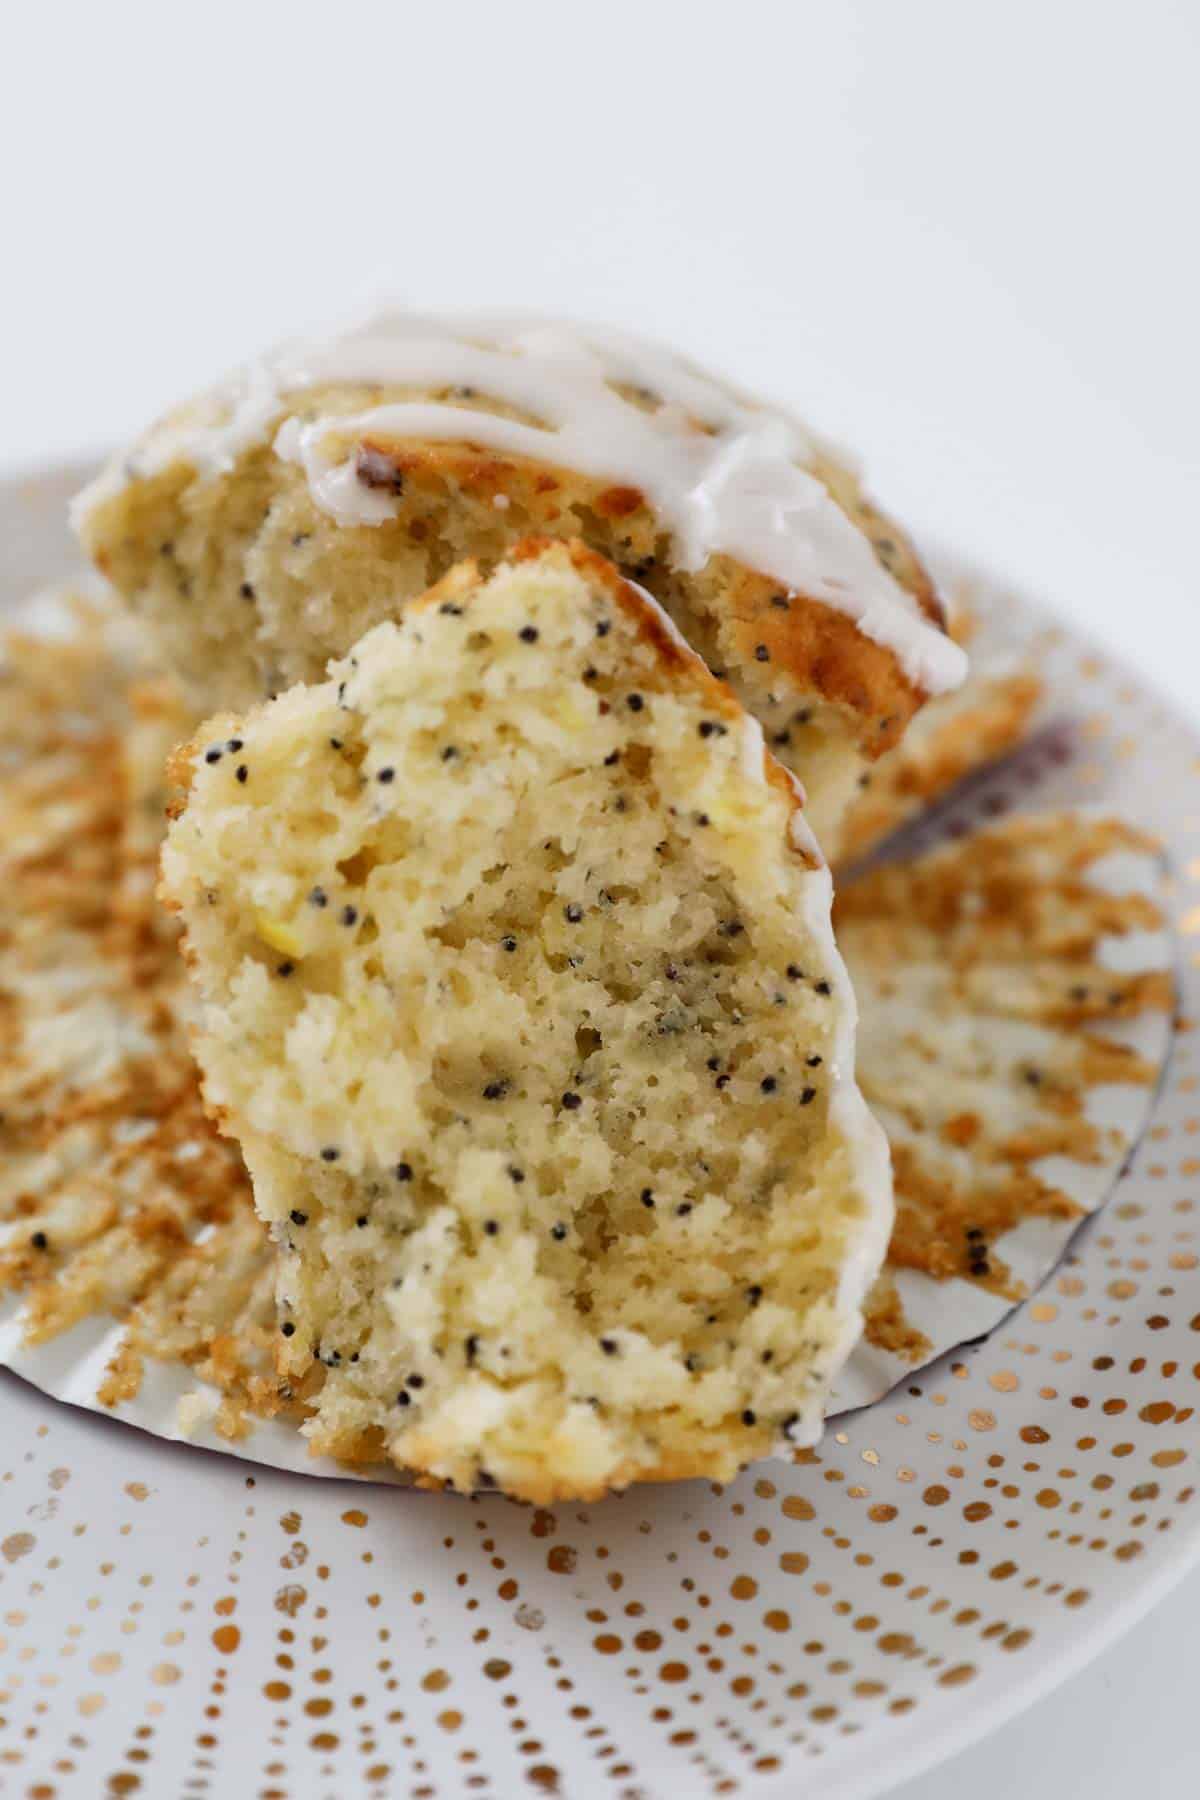 A poppyseed muffin split in half with the fluffy inside showing